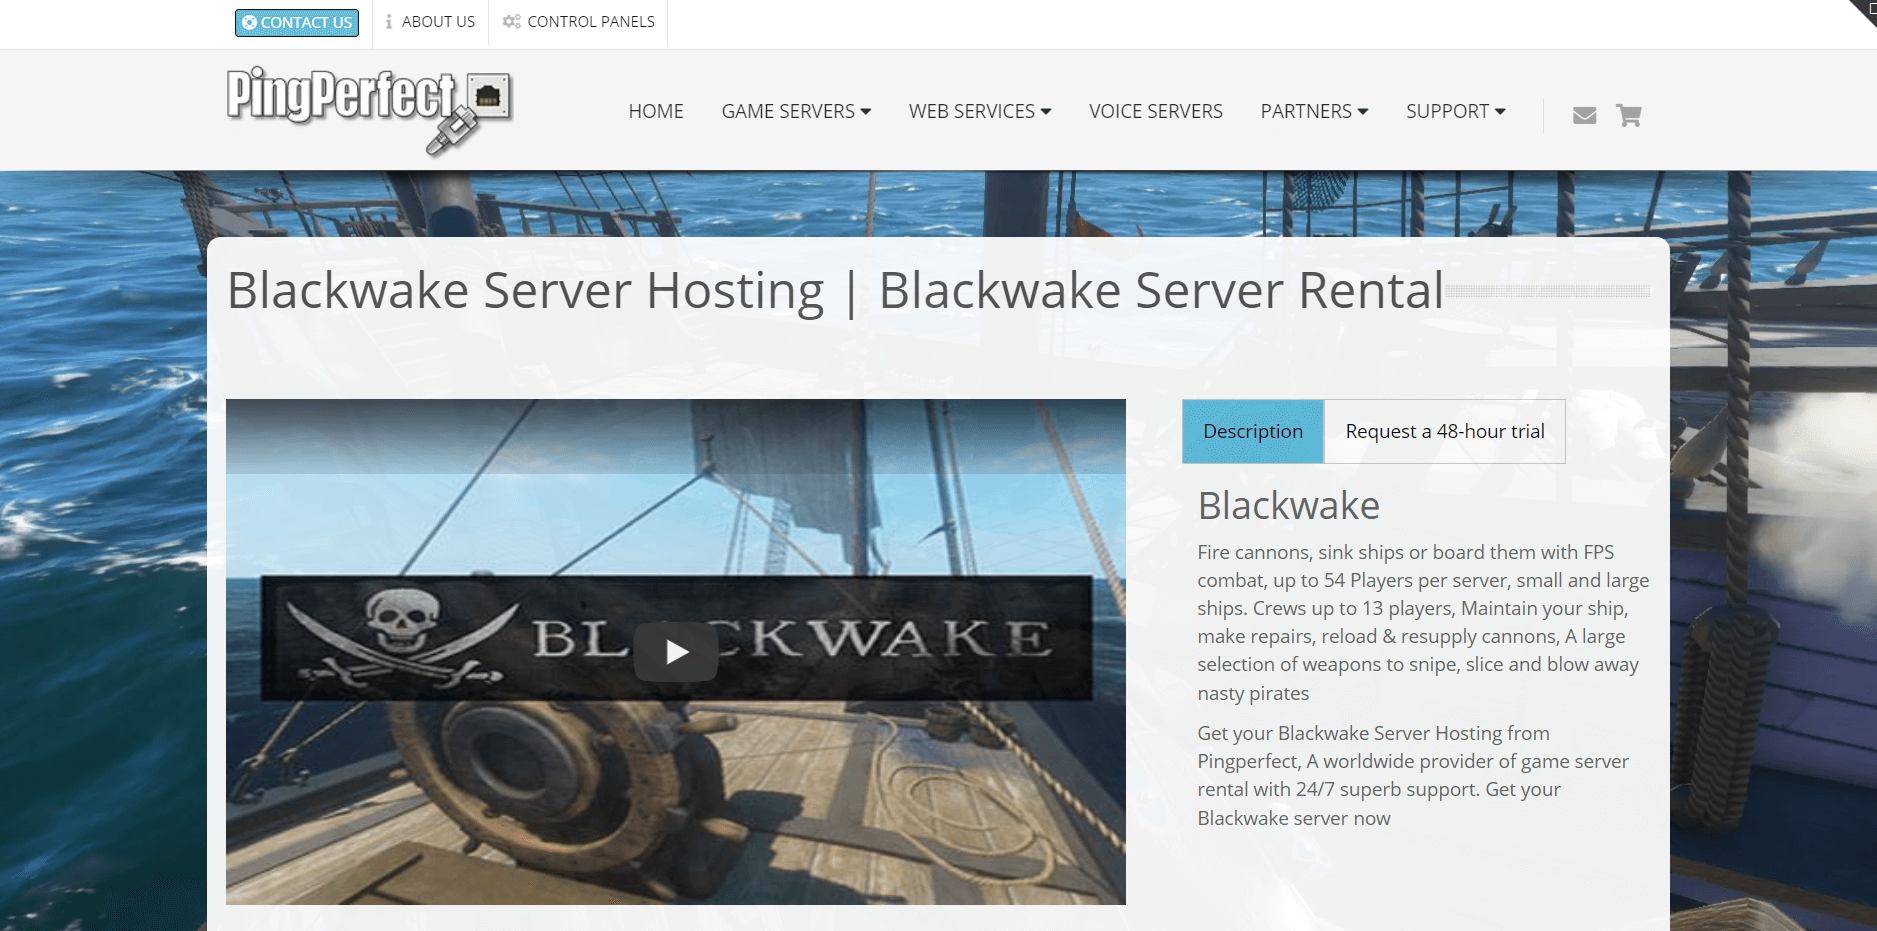 PingPerfect is a reliable Blackwake server hosting provider